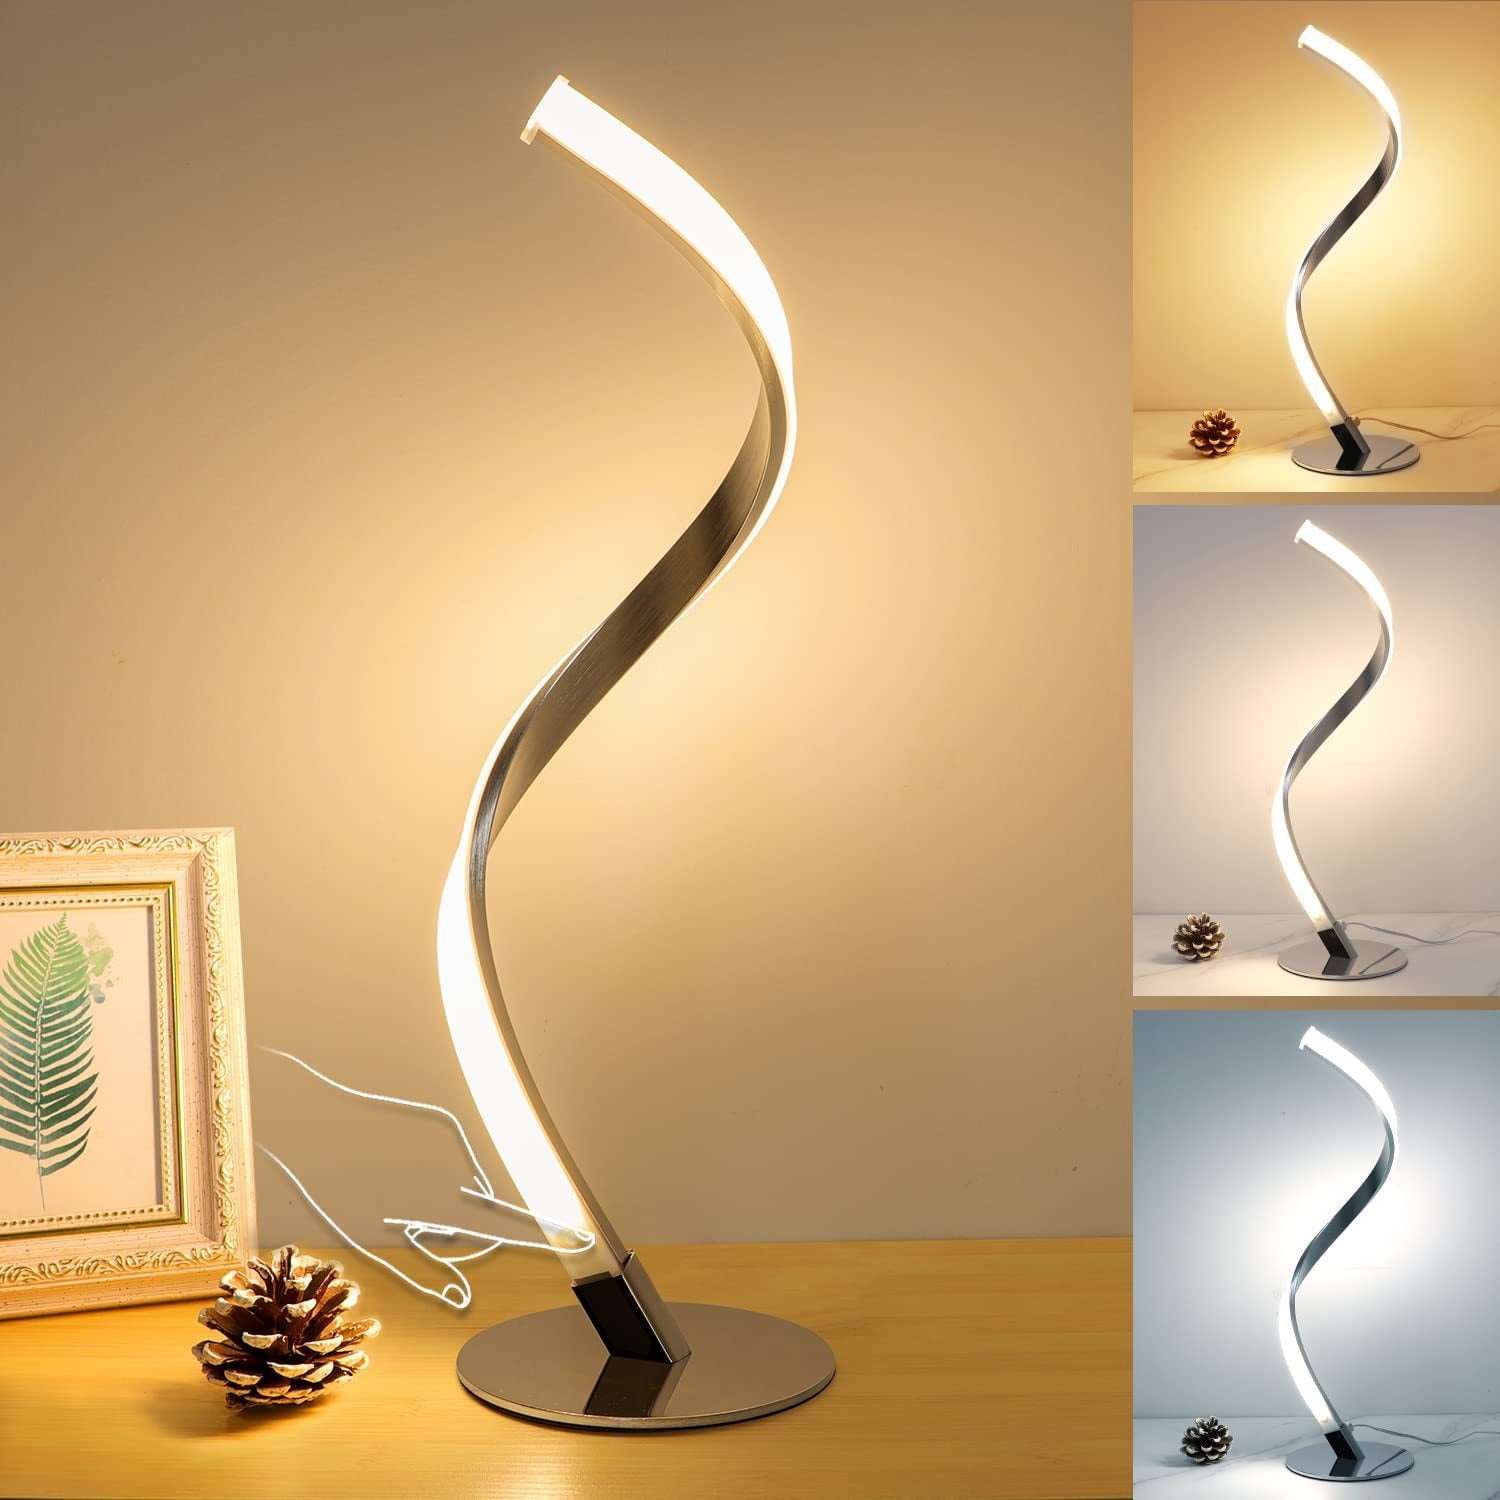 Spiral Table Lamp for Bedroom Nightstand